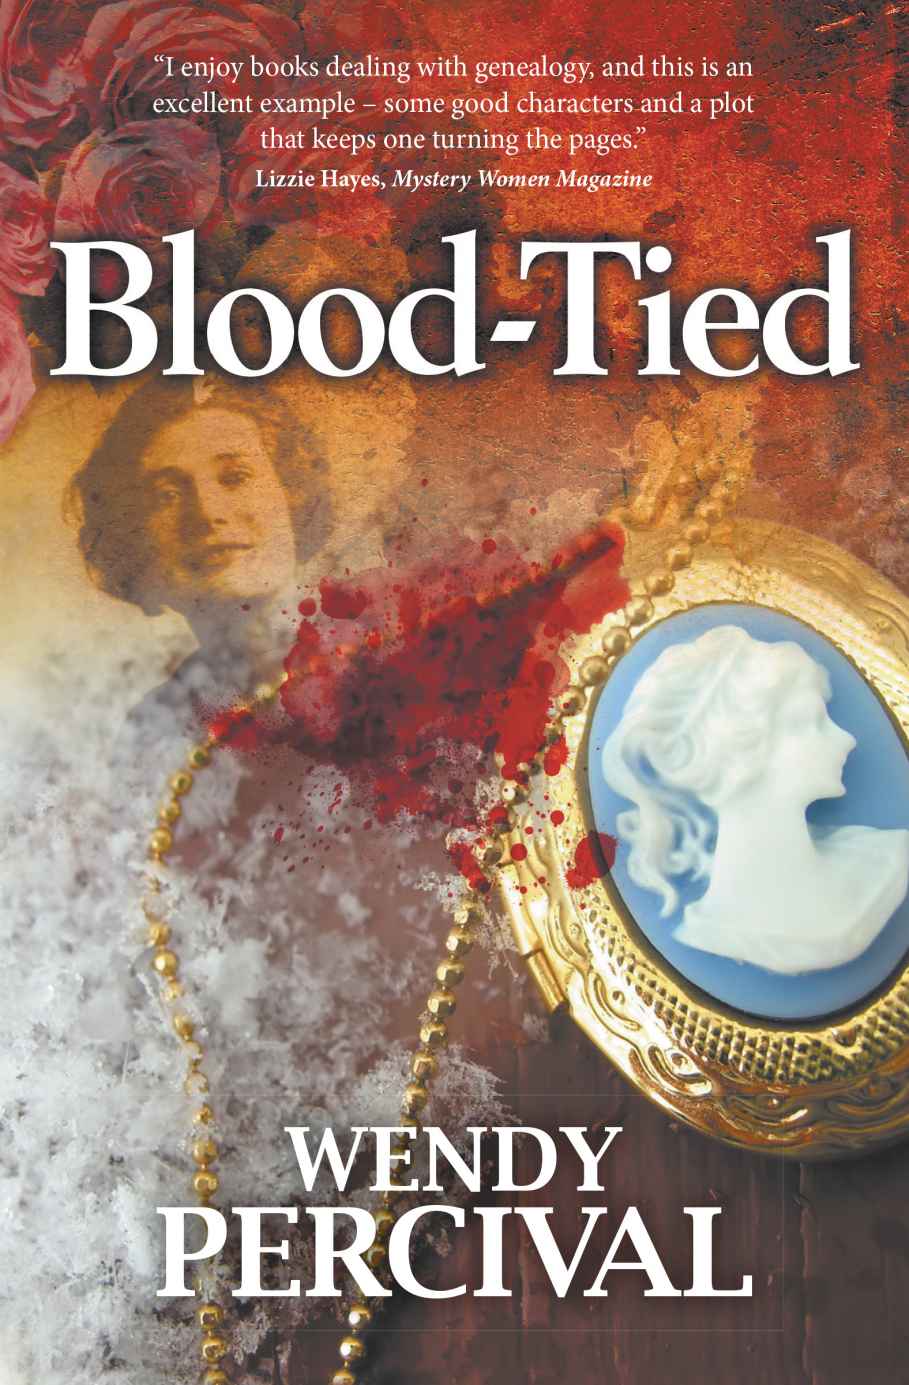 Blood-Tied by Wendy Percival